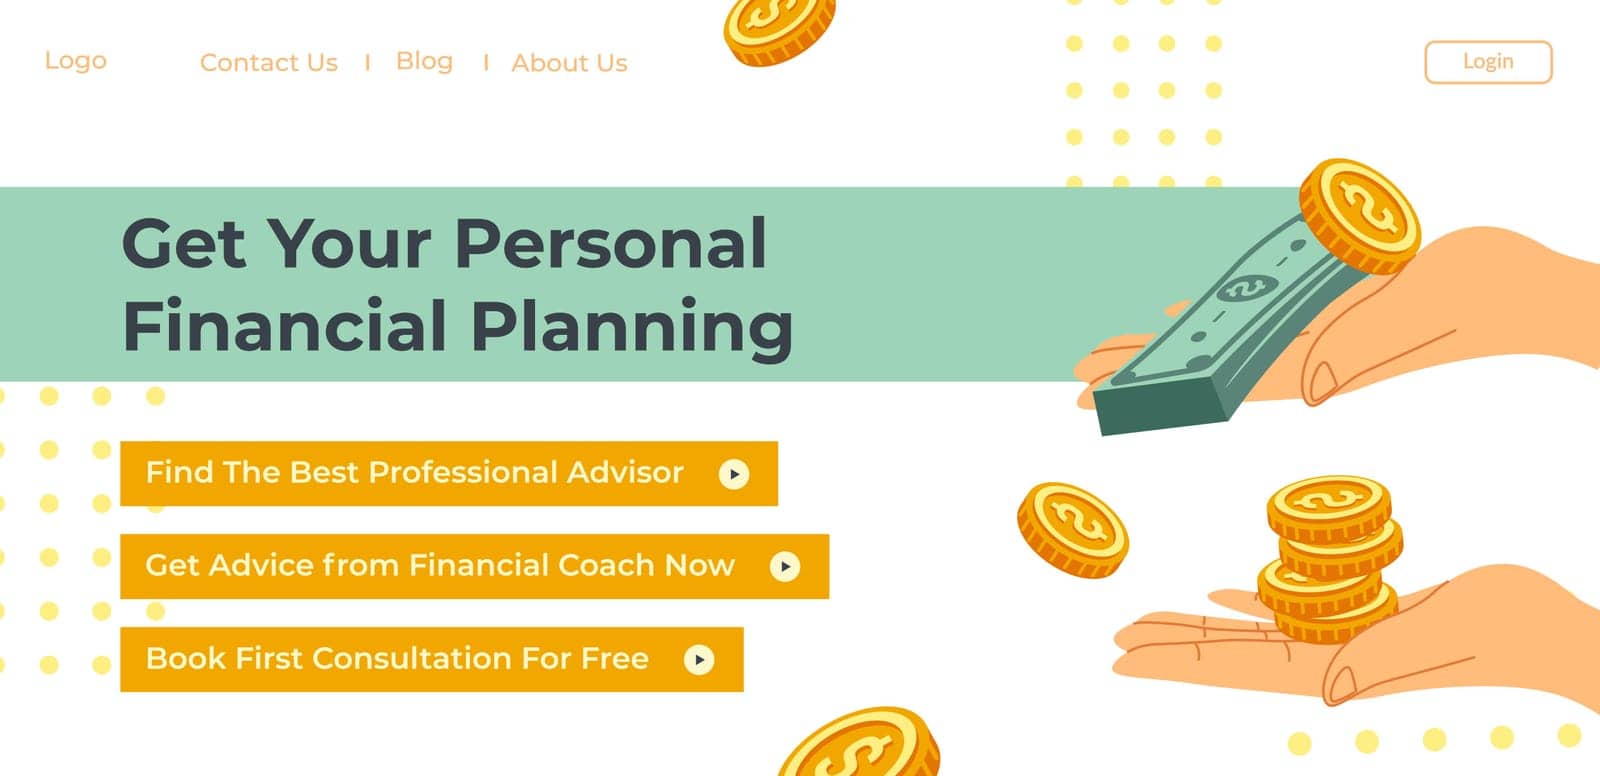 Get your personal financial planning application by Sonulkaster